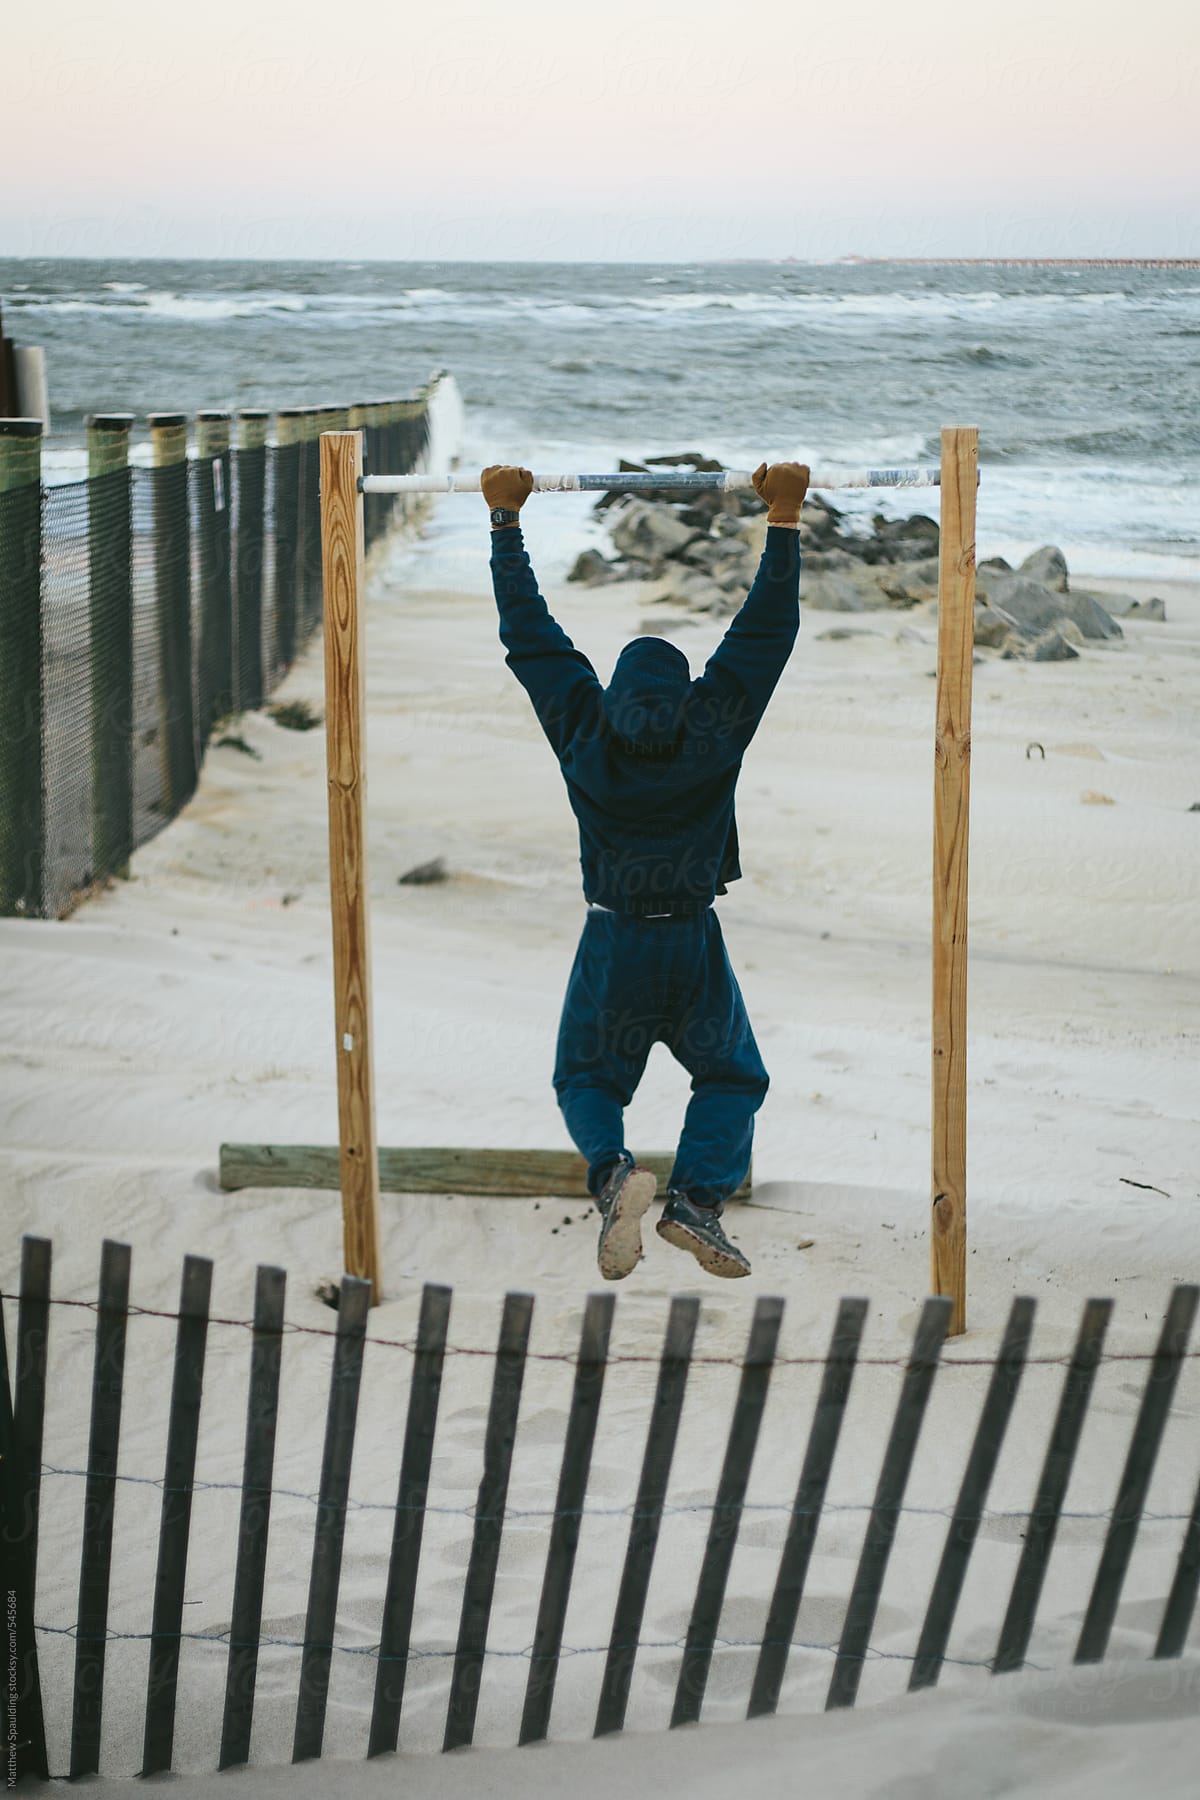 Man in sweat shirt doing pullup exercises on beach outdoors